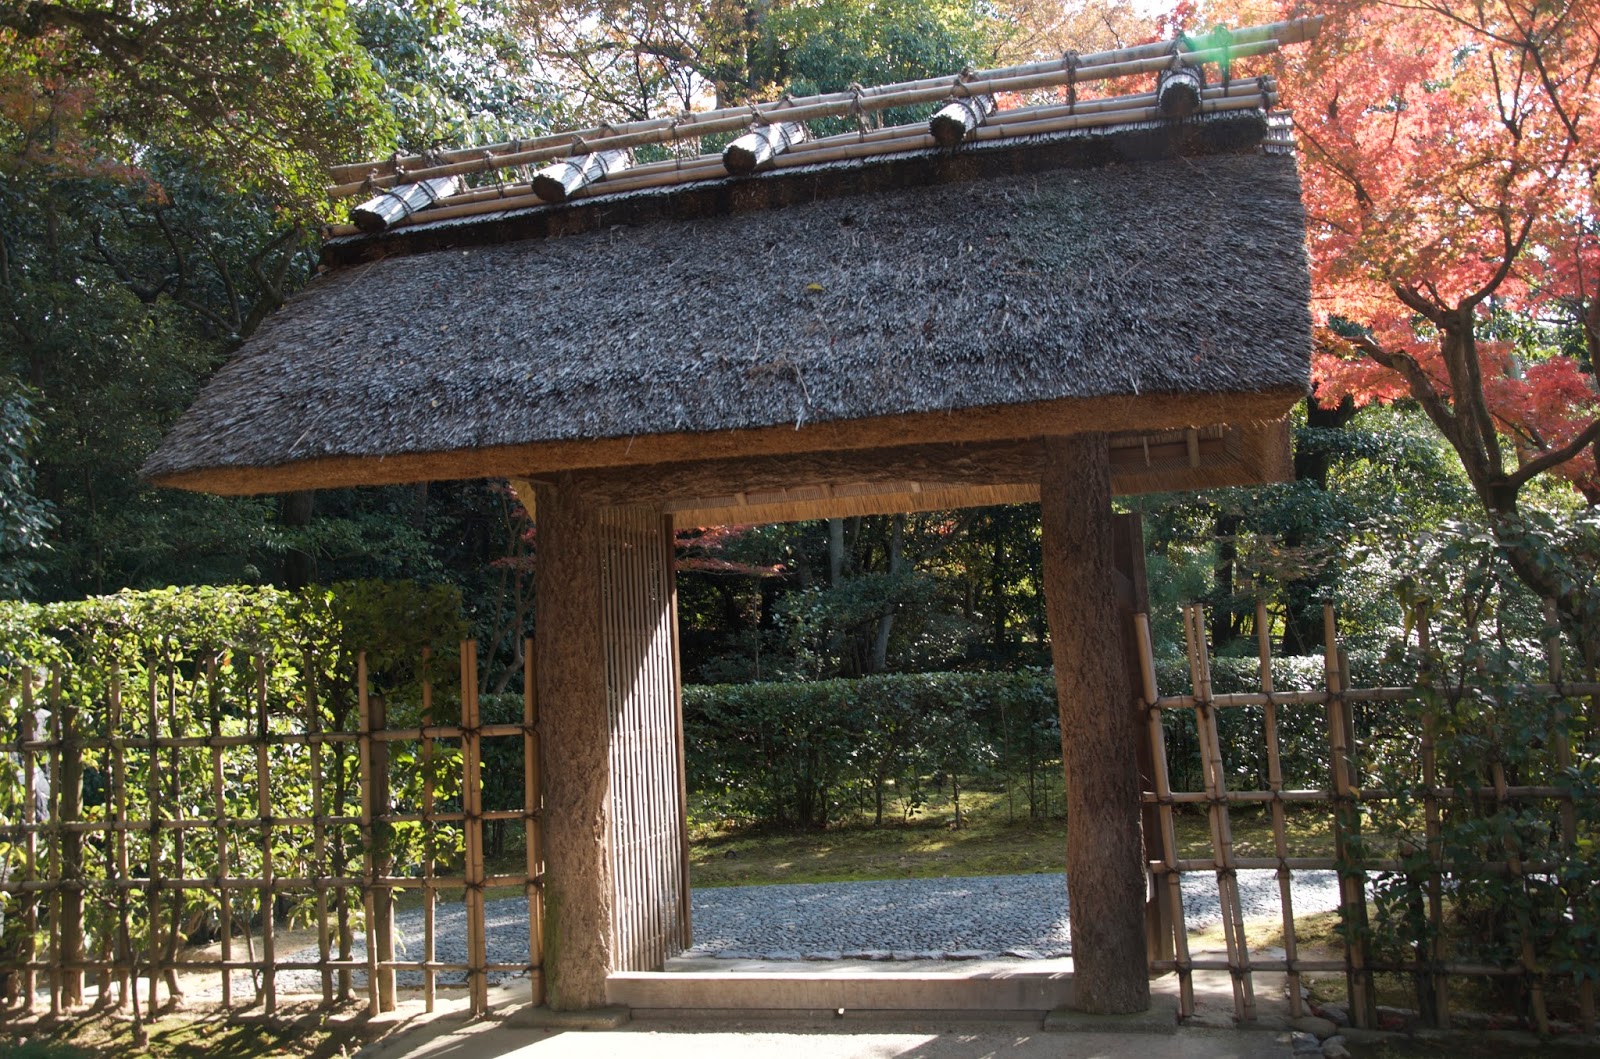 Robert Ketchells Blog Symbolism And Reference In The Japanese Garden